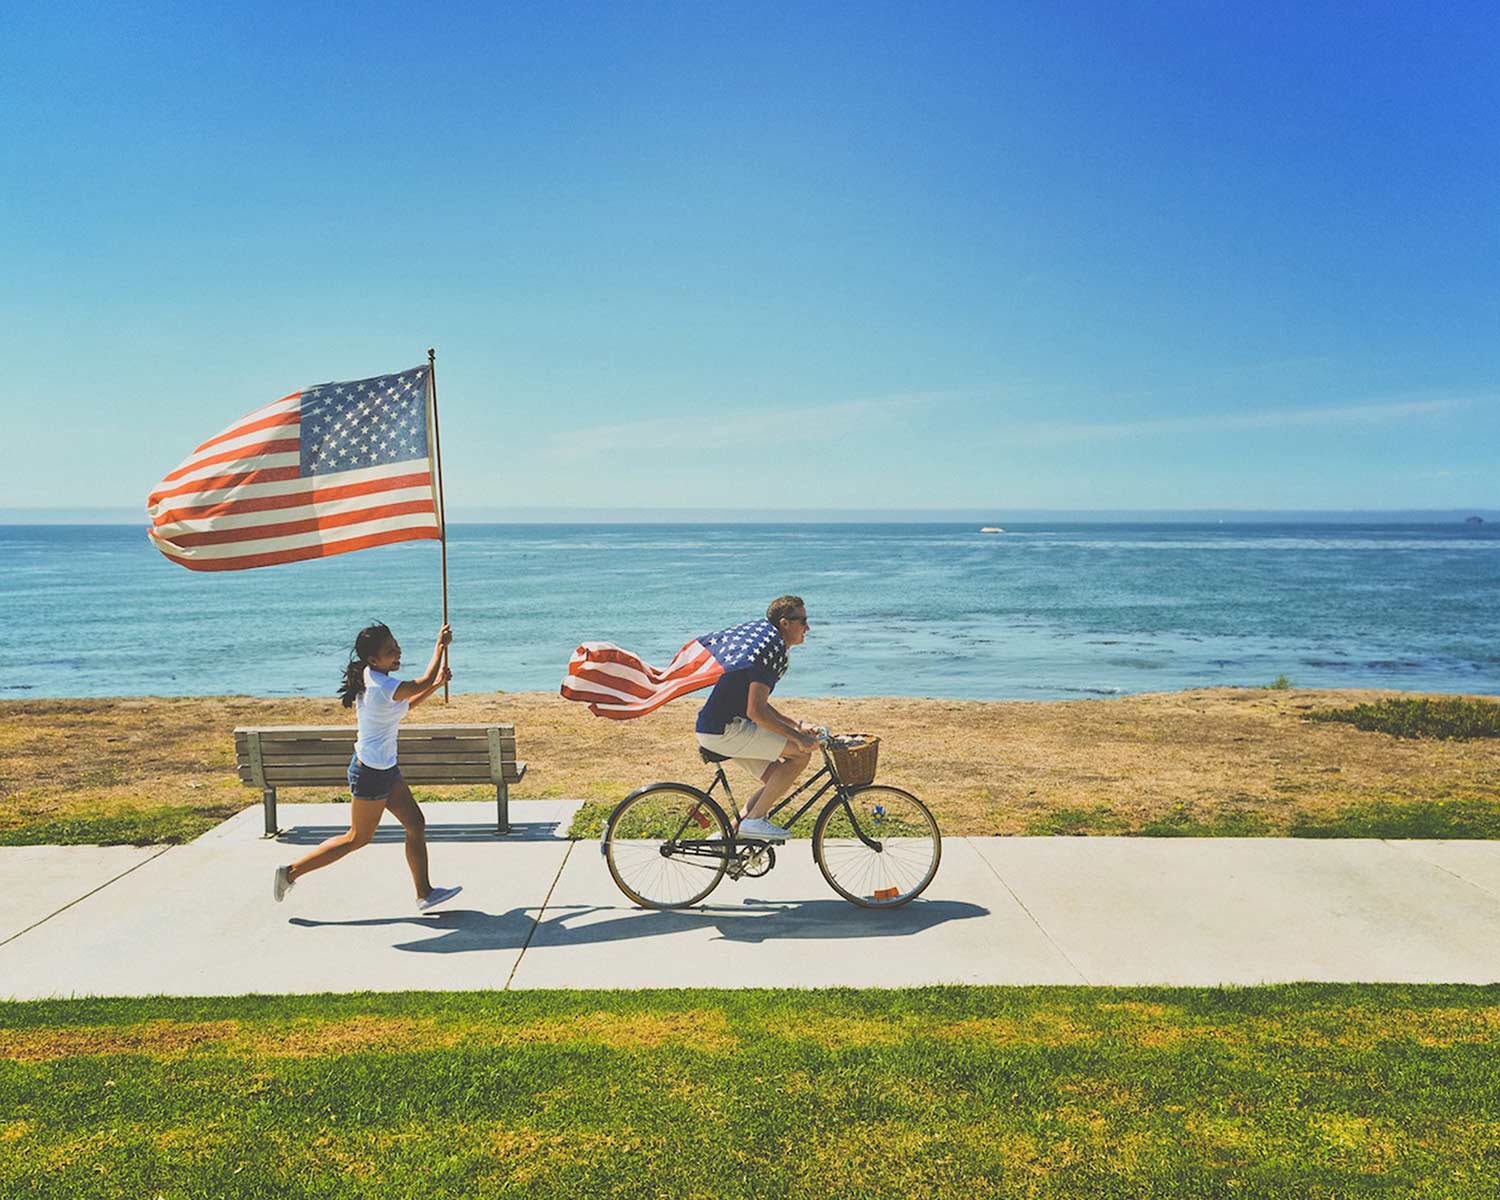 Beside the ocean, a man rides a bike with an American flag tied around his neck like a cape. Behind him, a woman runs with an American flag on a flagpole.